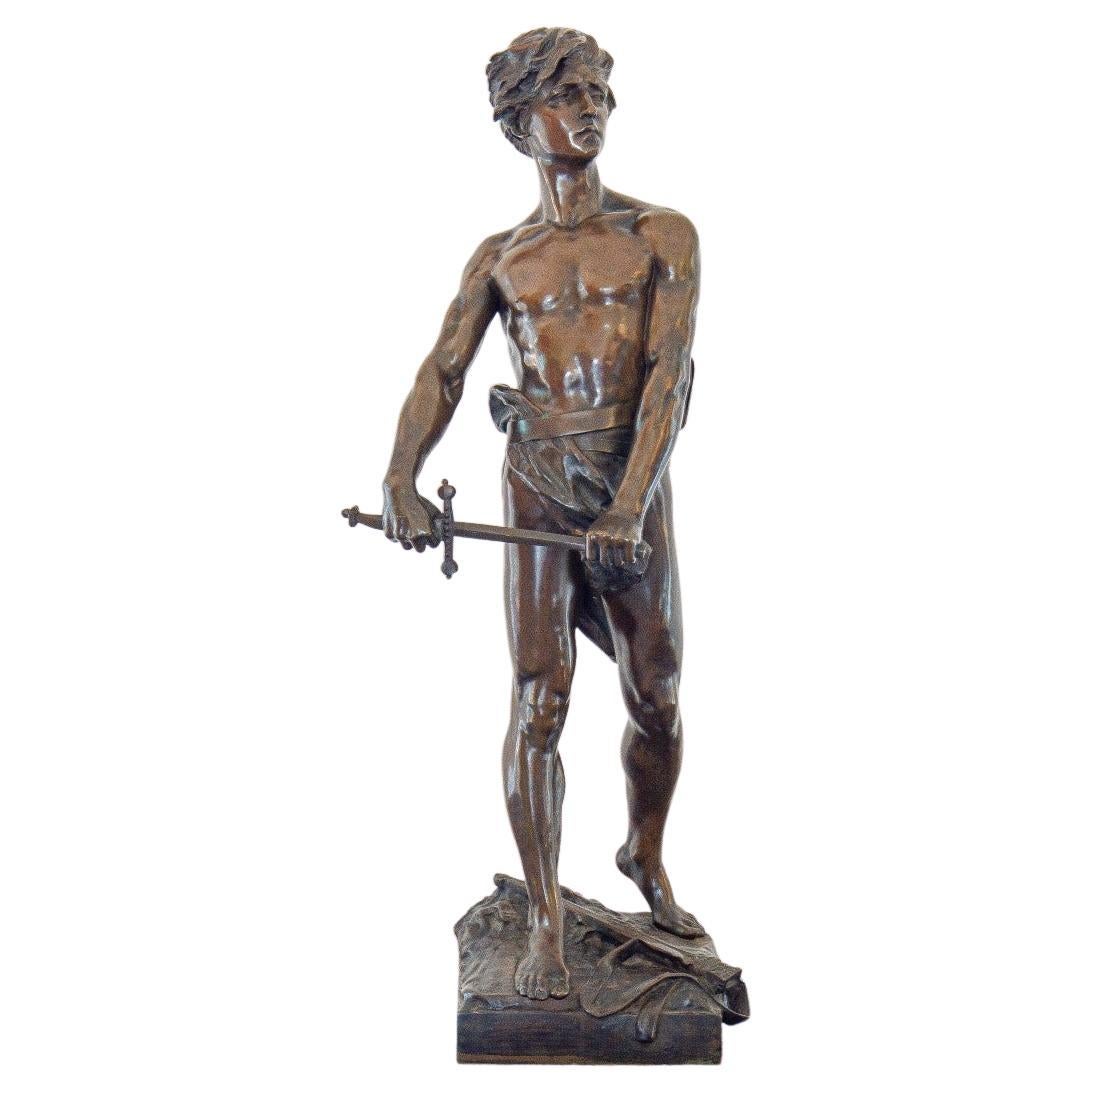 Late 19th Century French Bronze Figure Titled 'Vingt Ans'